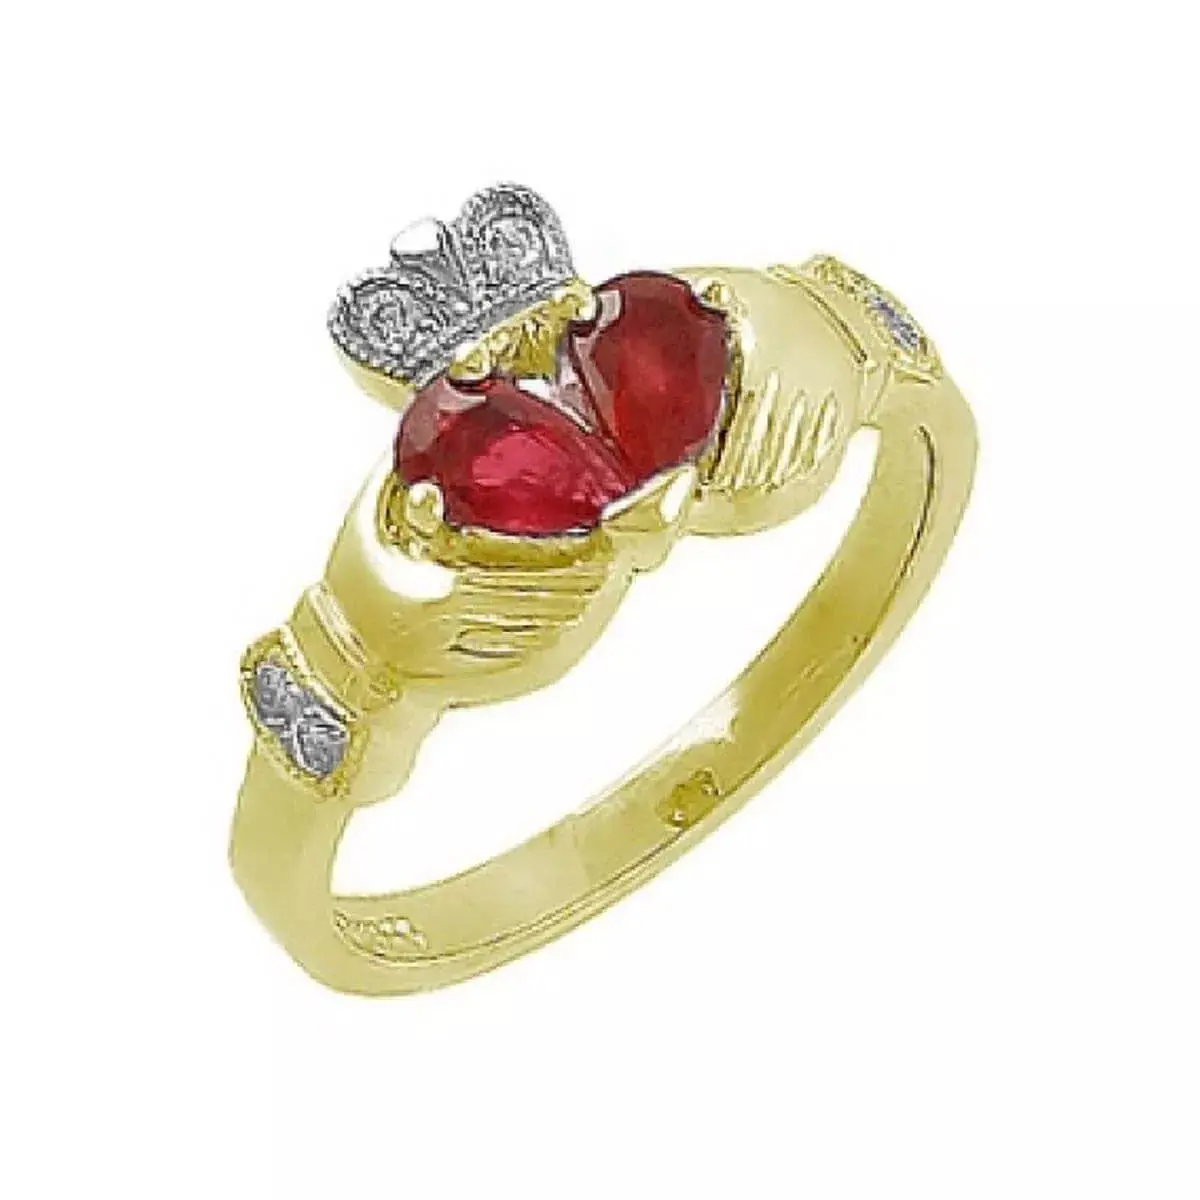 Pearshape Ruby And Diamond Claddagh Ring